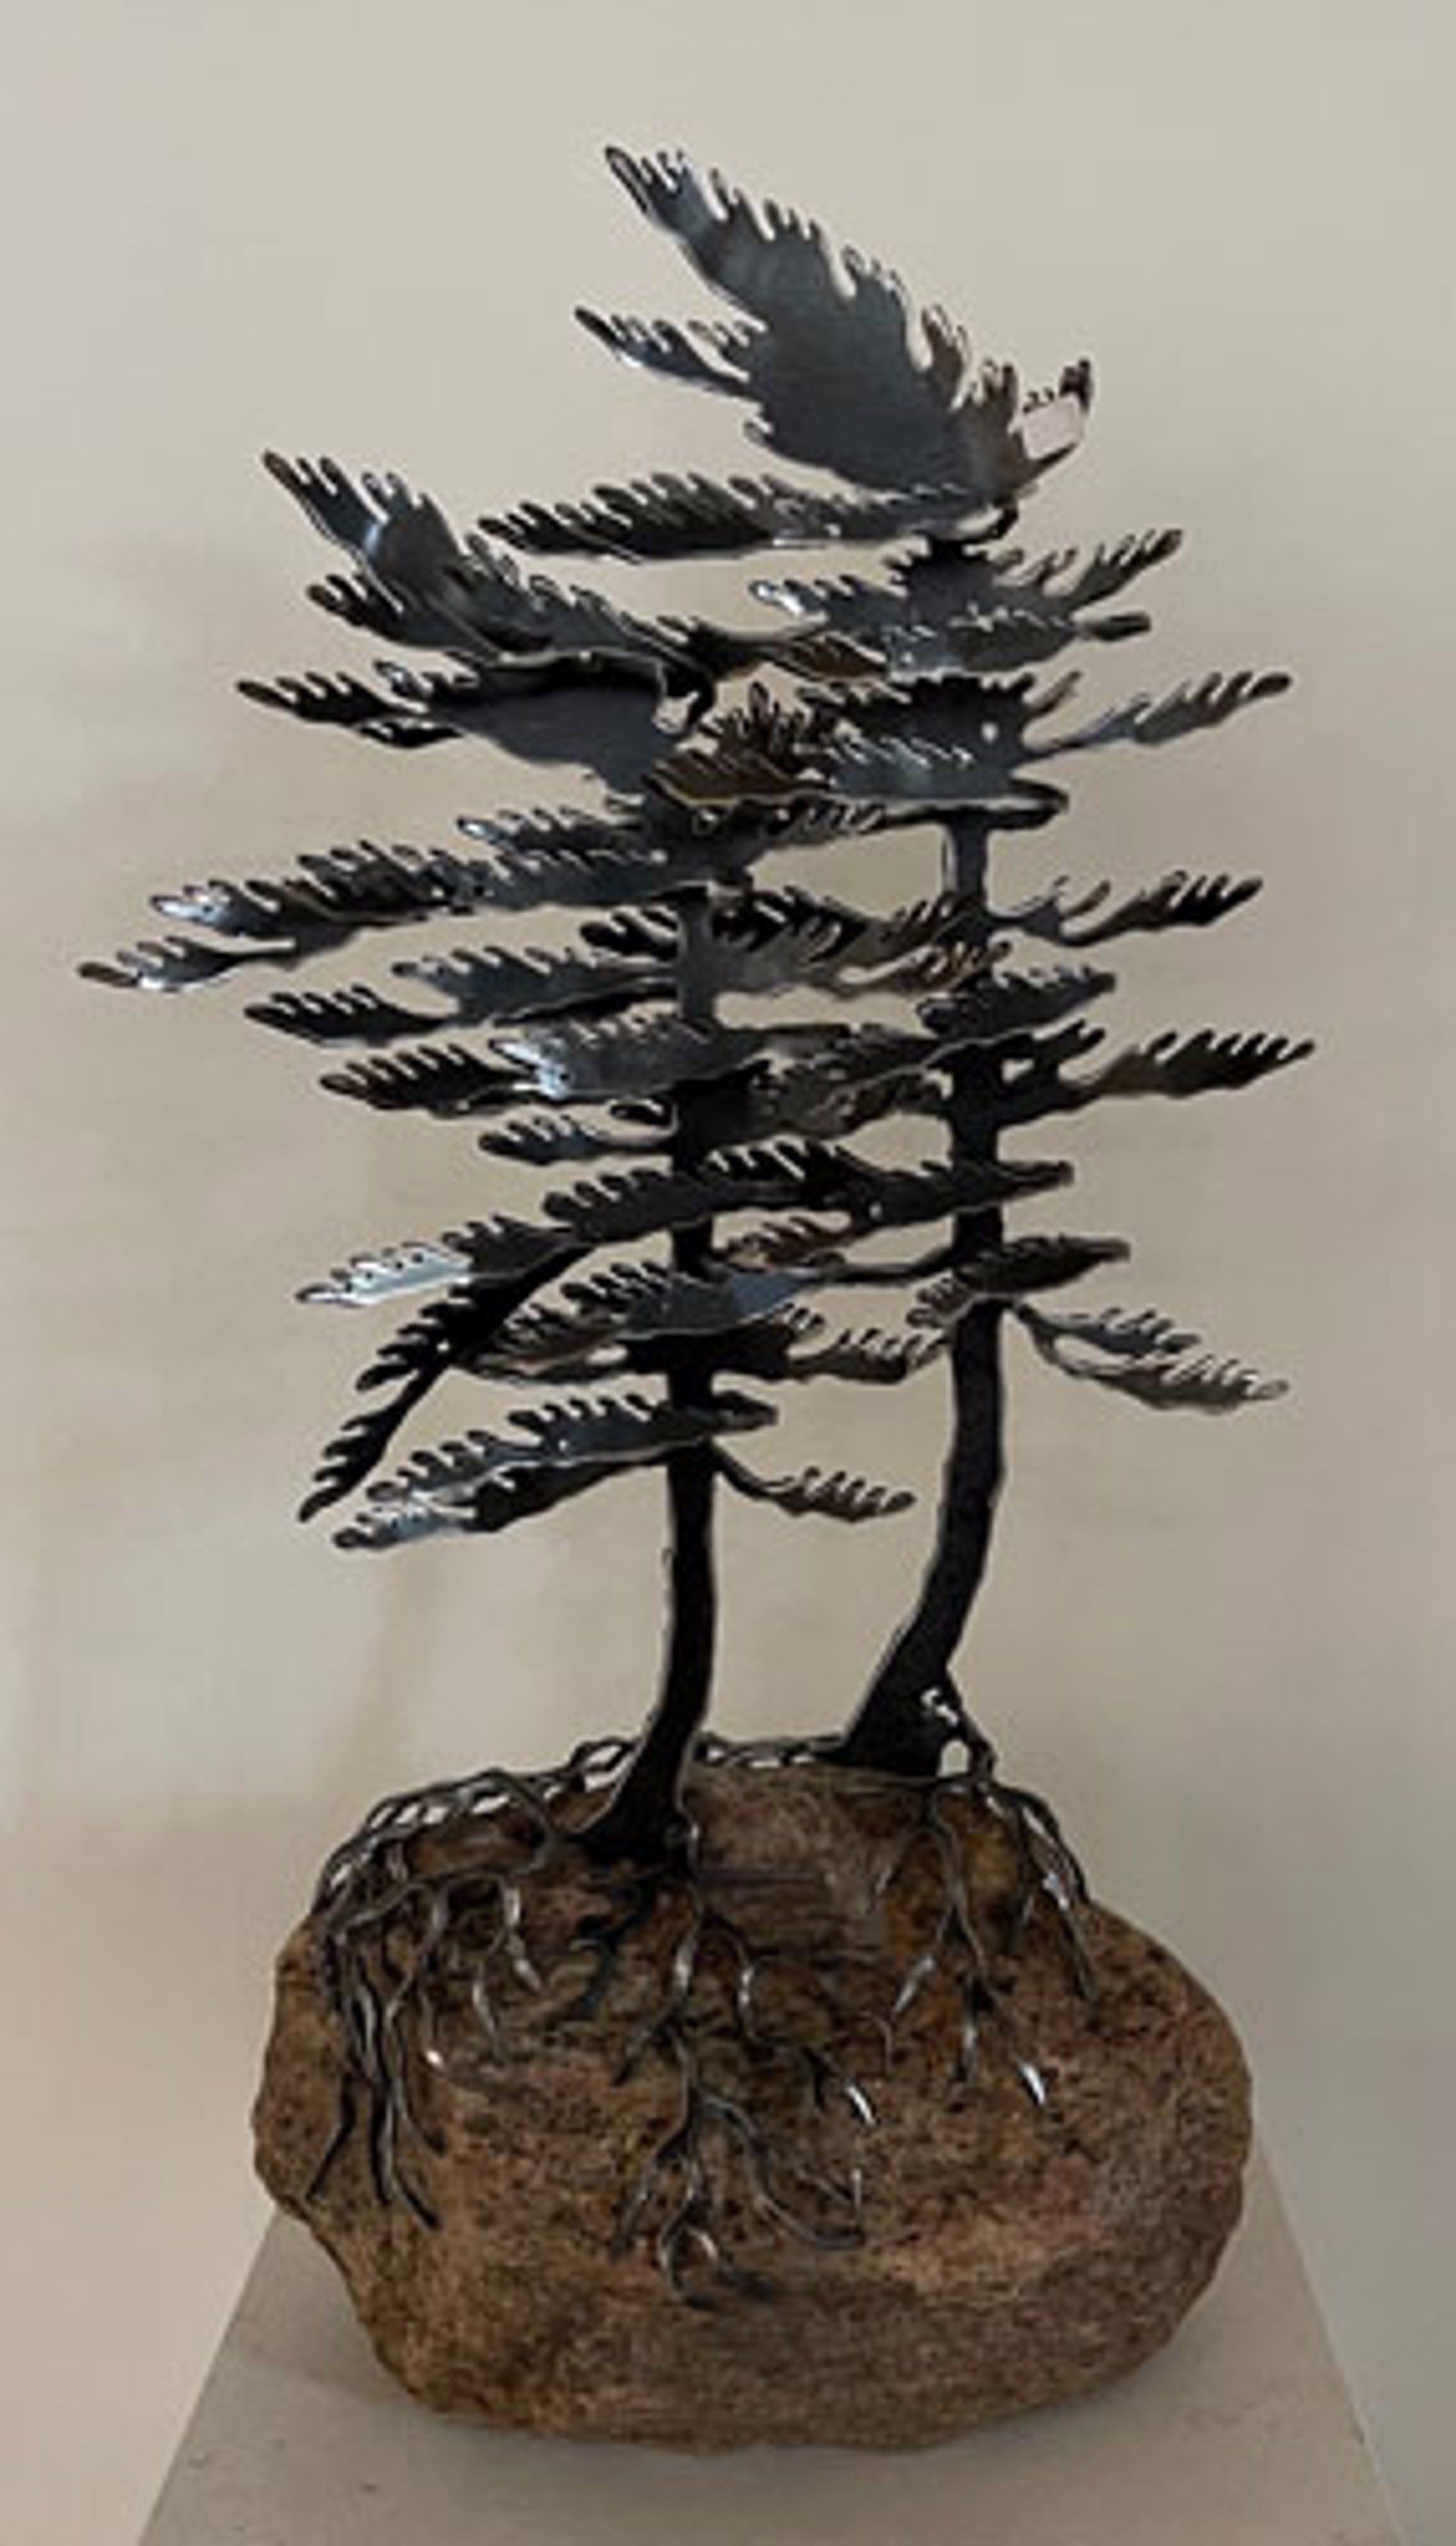 Two Windswept Pine on Granite 659359 by Cathy Mark